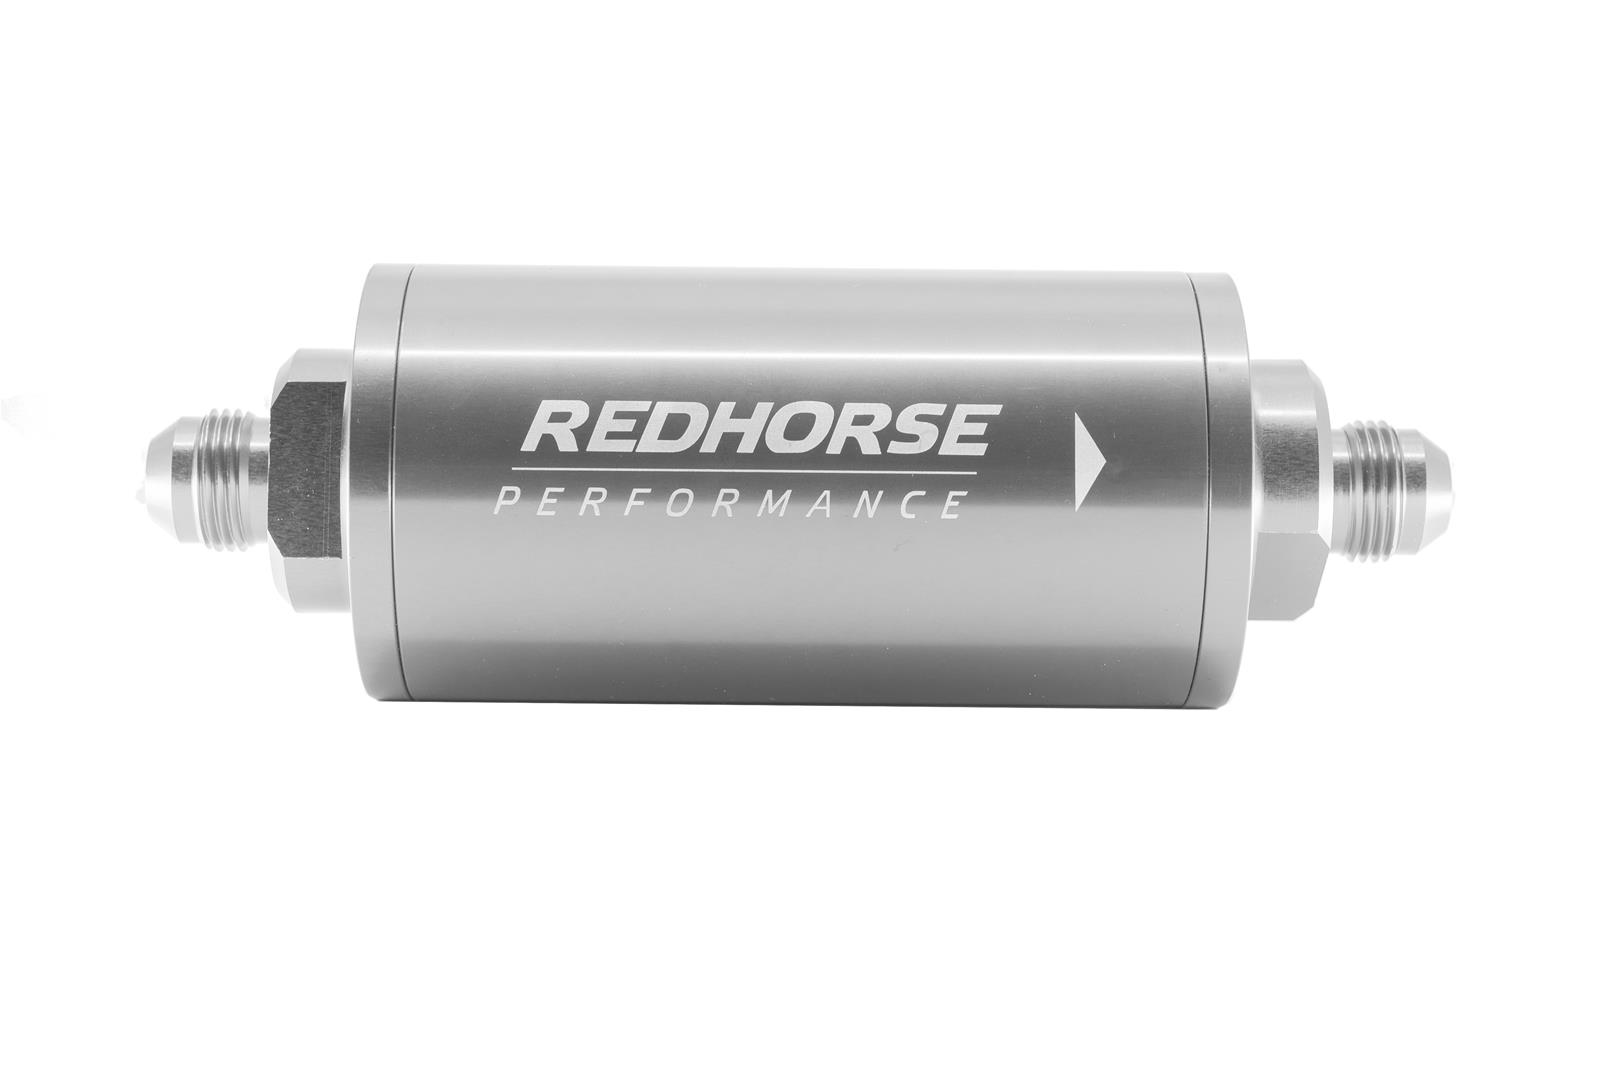 Redhorse Performance 4651-10-5-12 6in Cylindrical In-Line Race Fuel Filter w/ 12 Micron Fiberglass element - 10 AN